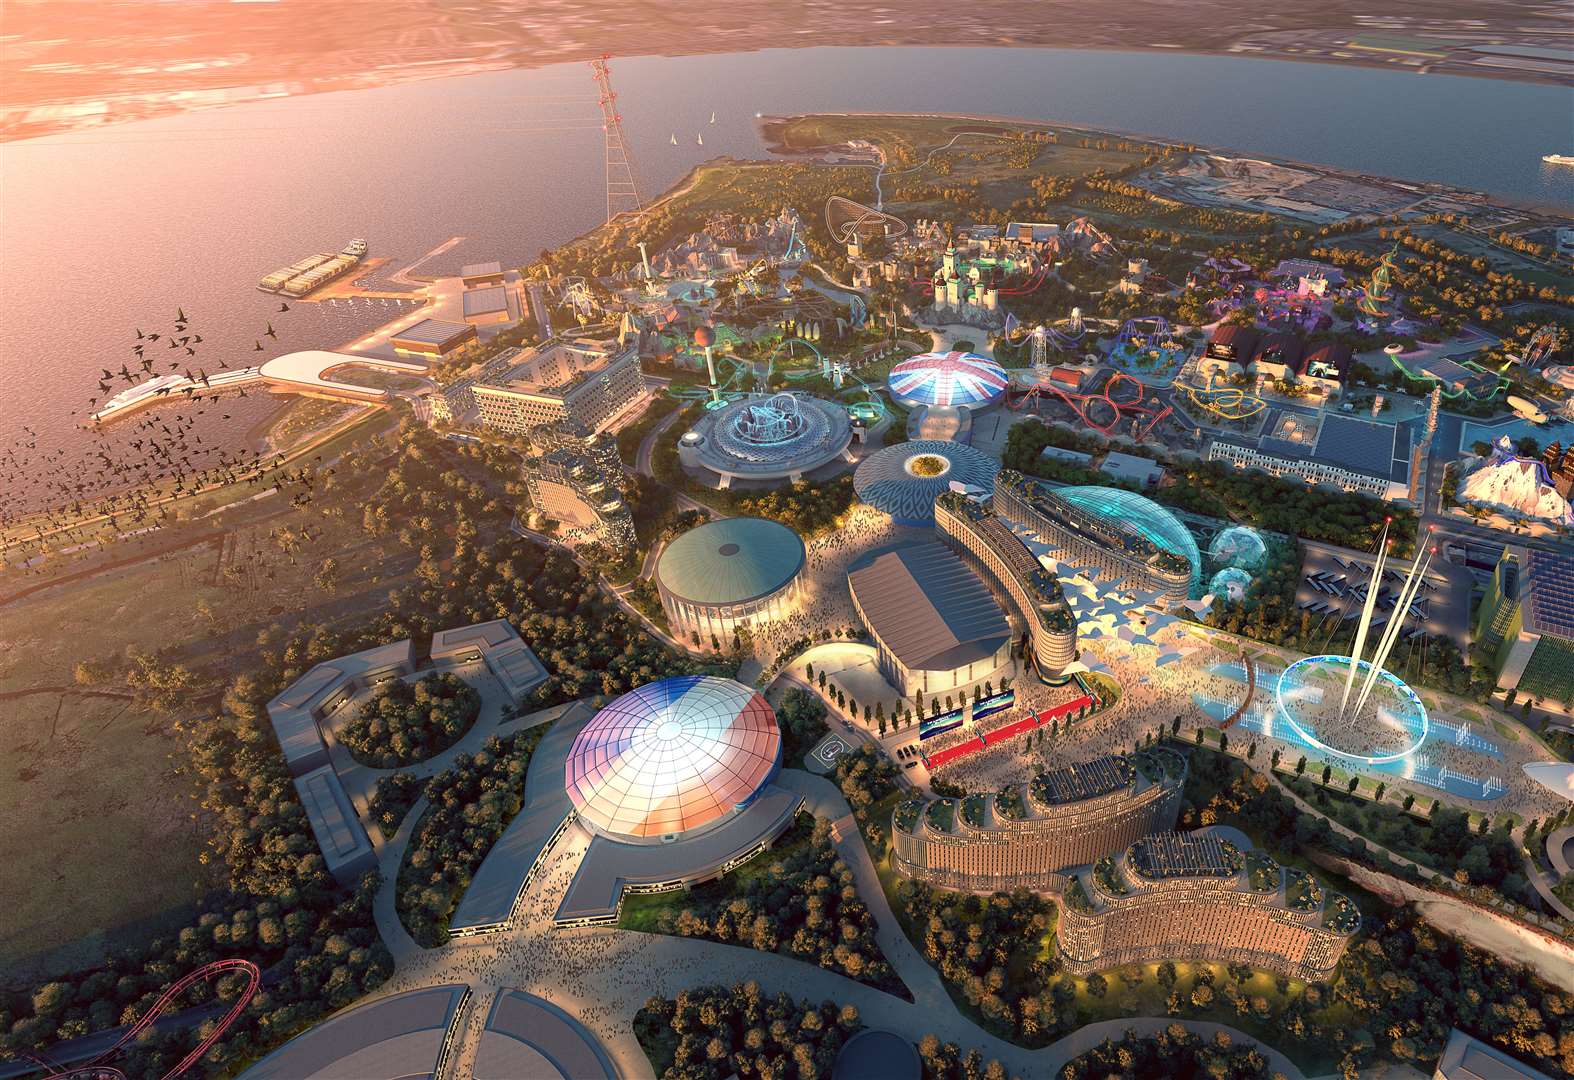 These proposals for the London Resort theme park which were submitted previously will now be scaled back.